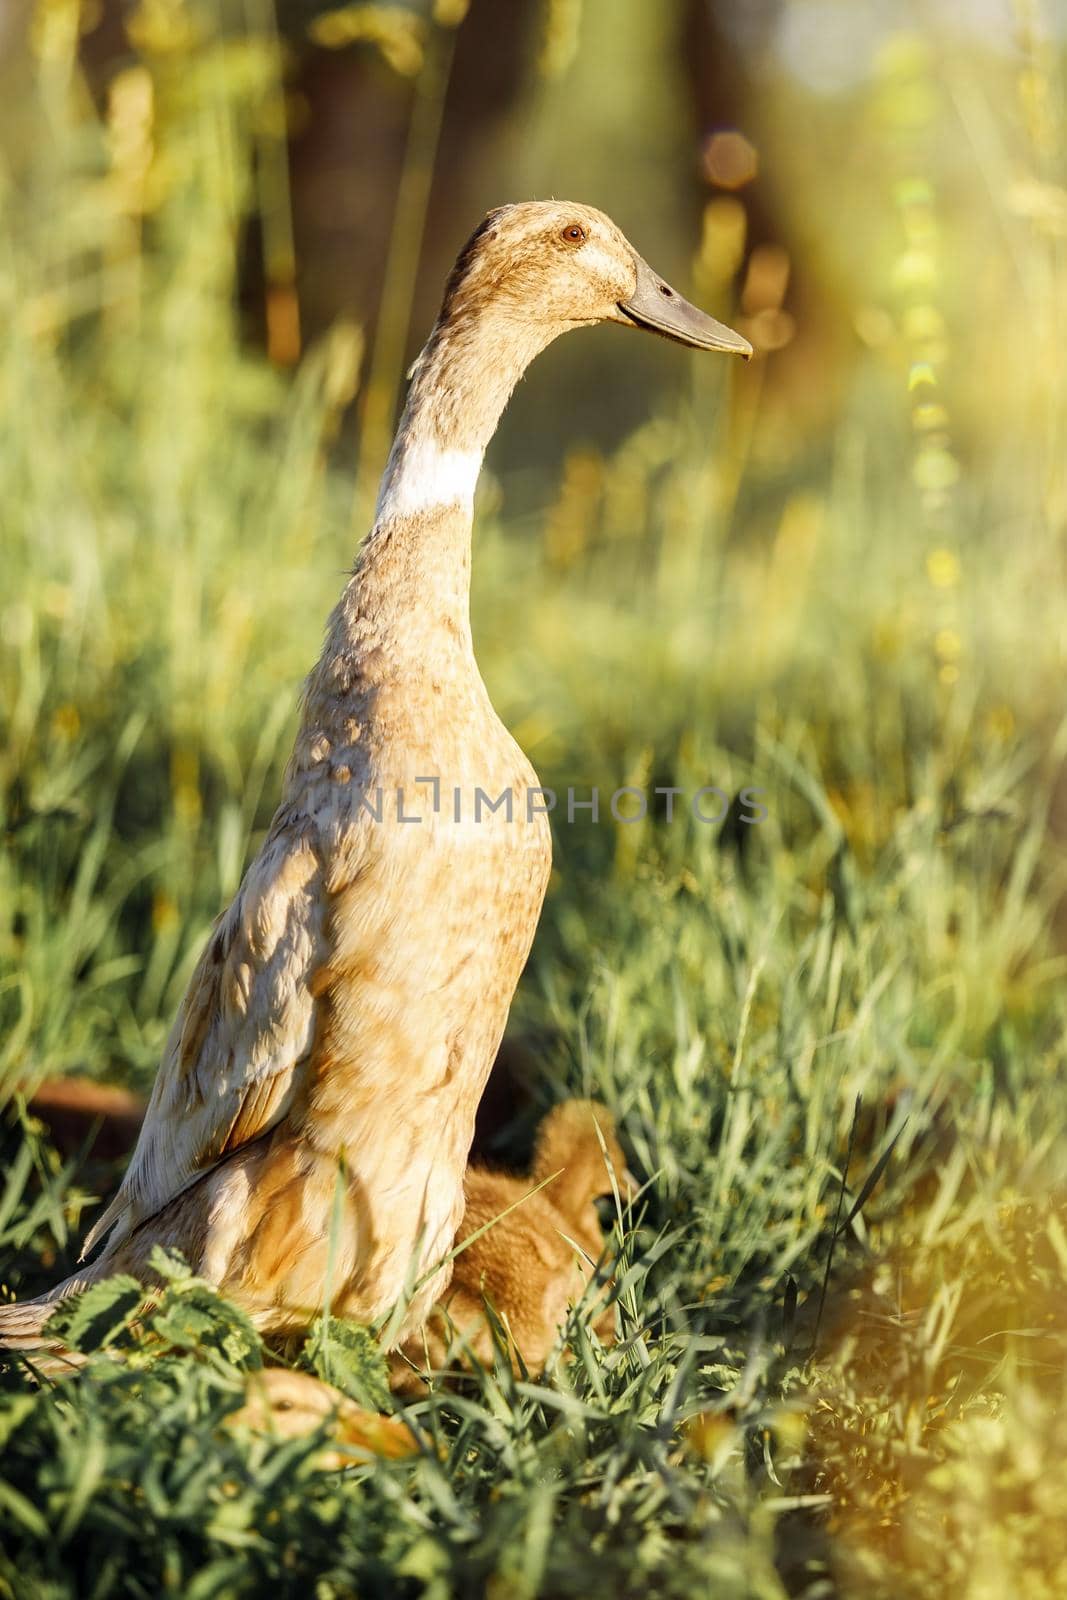 Indian Runner Duck, Anas platyrhynchos domesticus, female with brown beak, standing in high grass, on a green nature background.